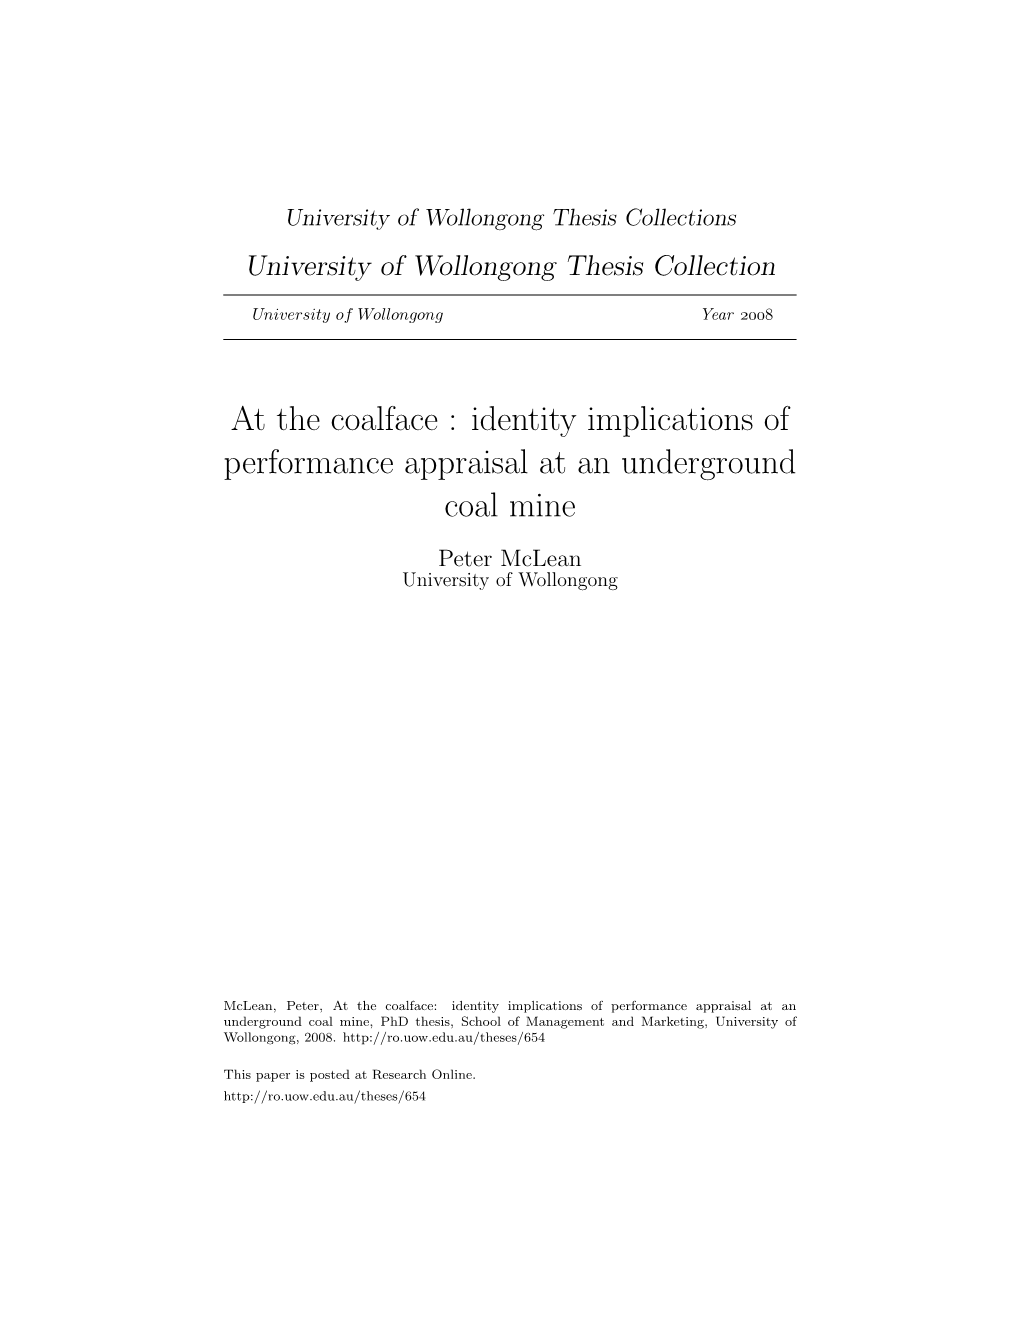 At the Coalface : Identity Implications of Performance Appraisal at an Underground Coal Mine Peter Mclean University of Wollongong